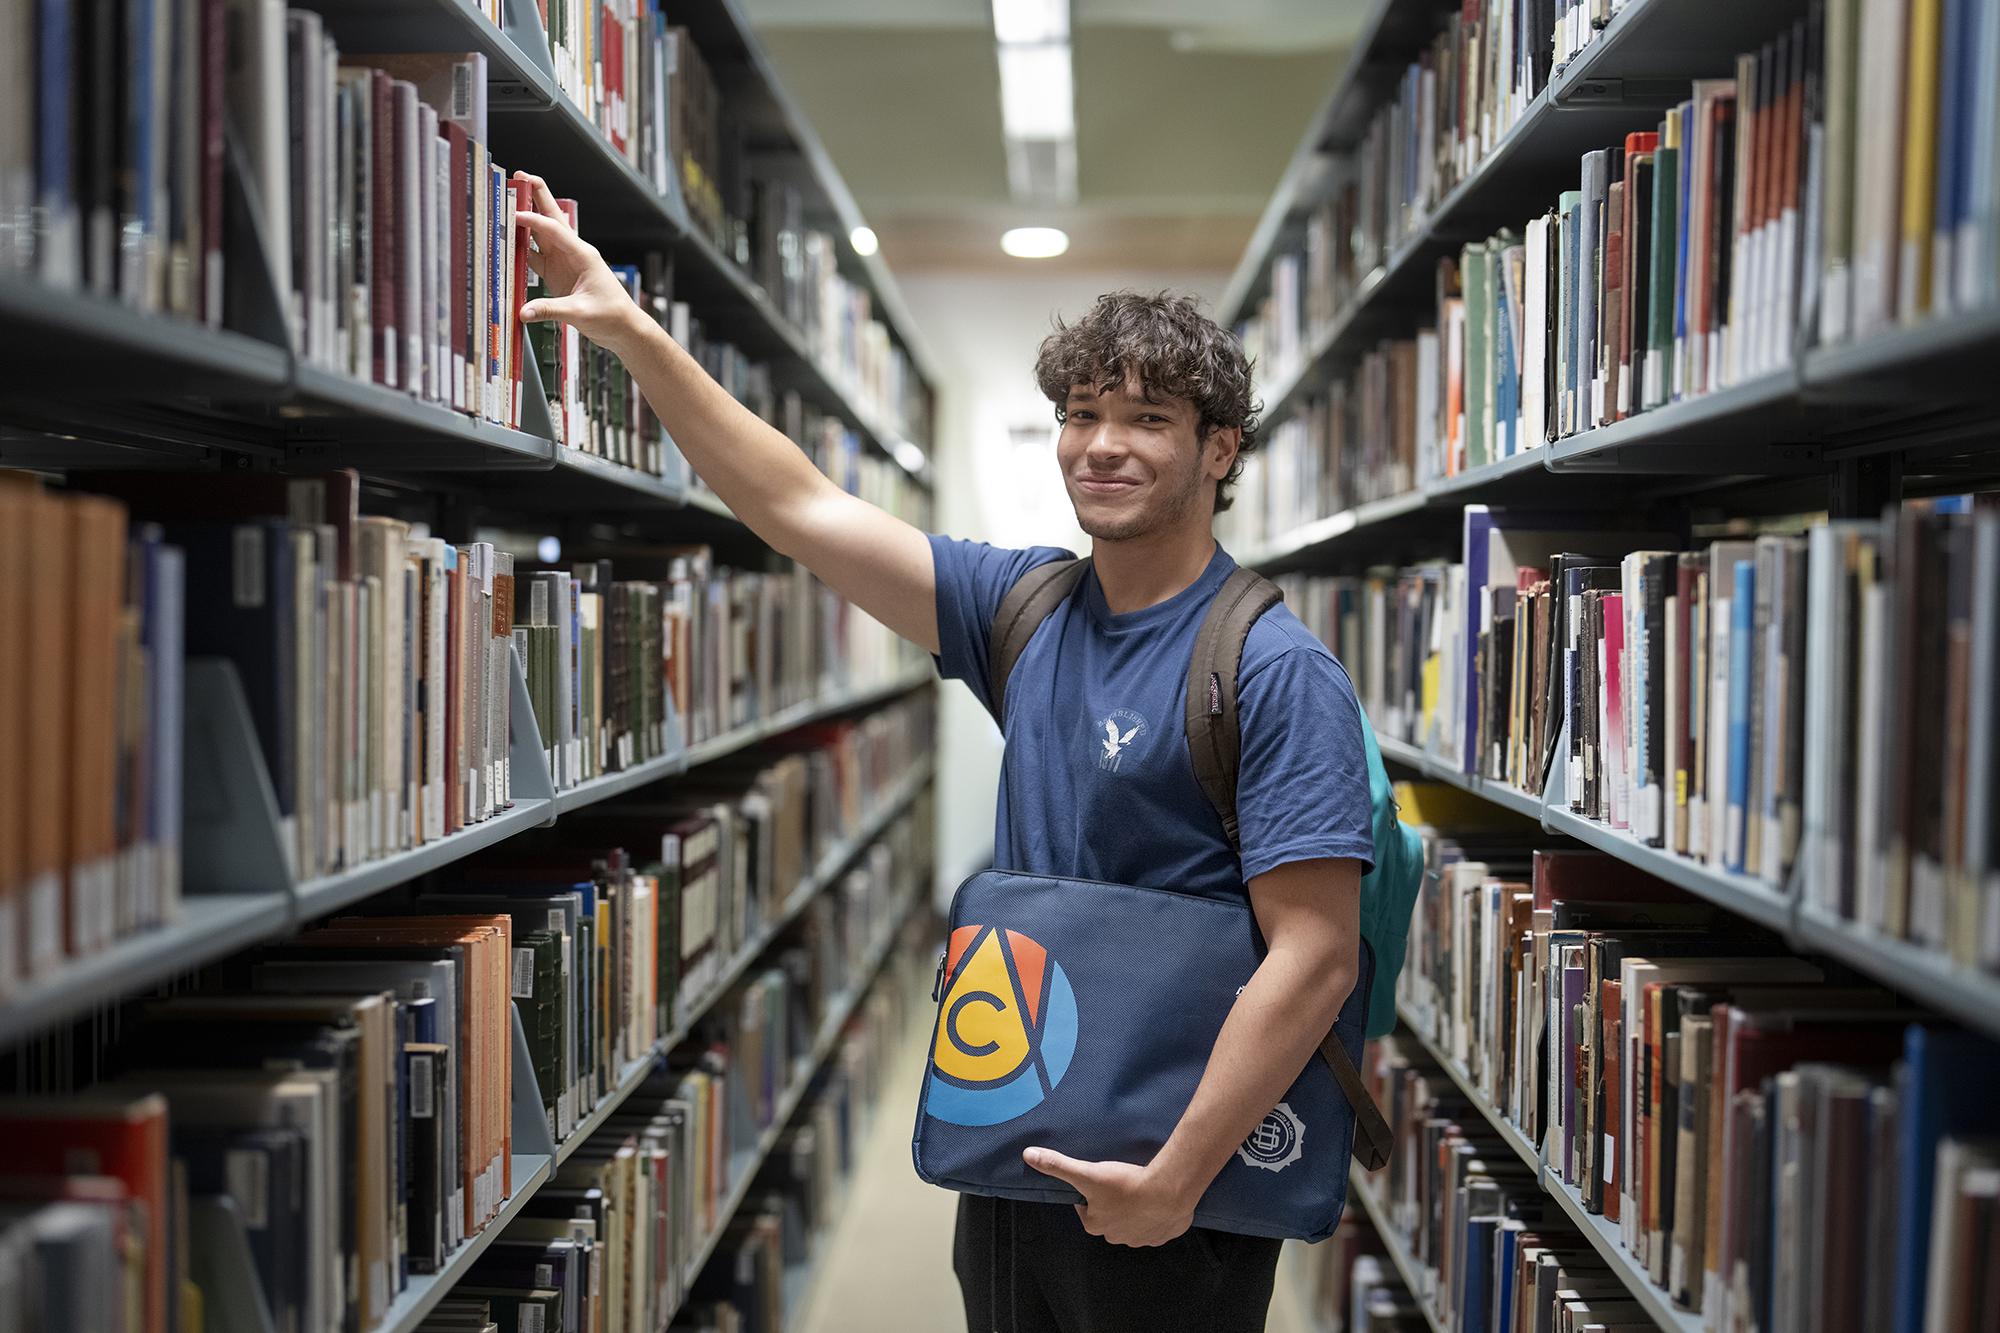 A male student is standing in a library in front of book shelves